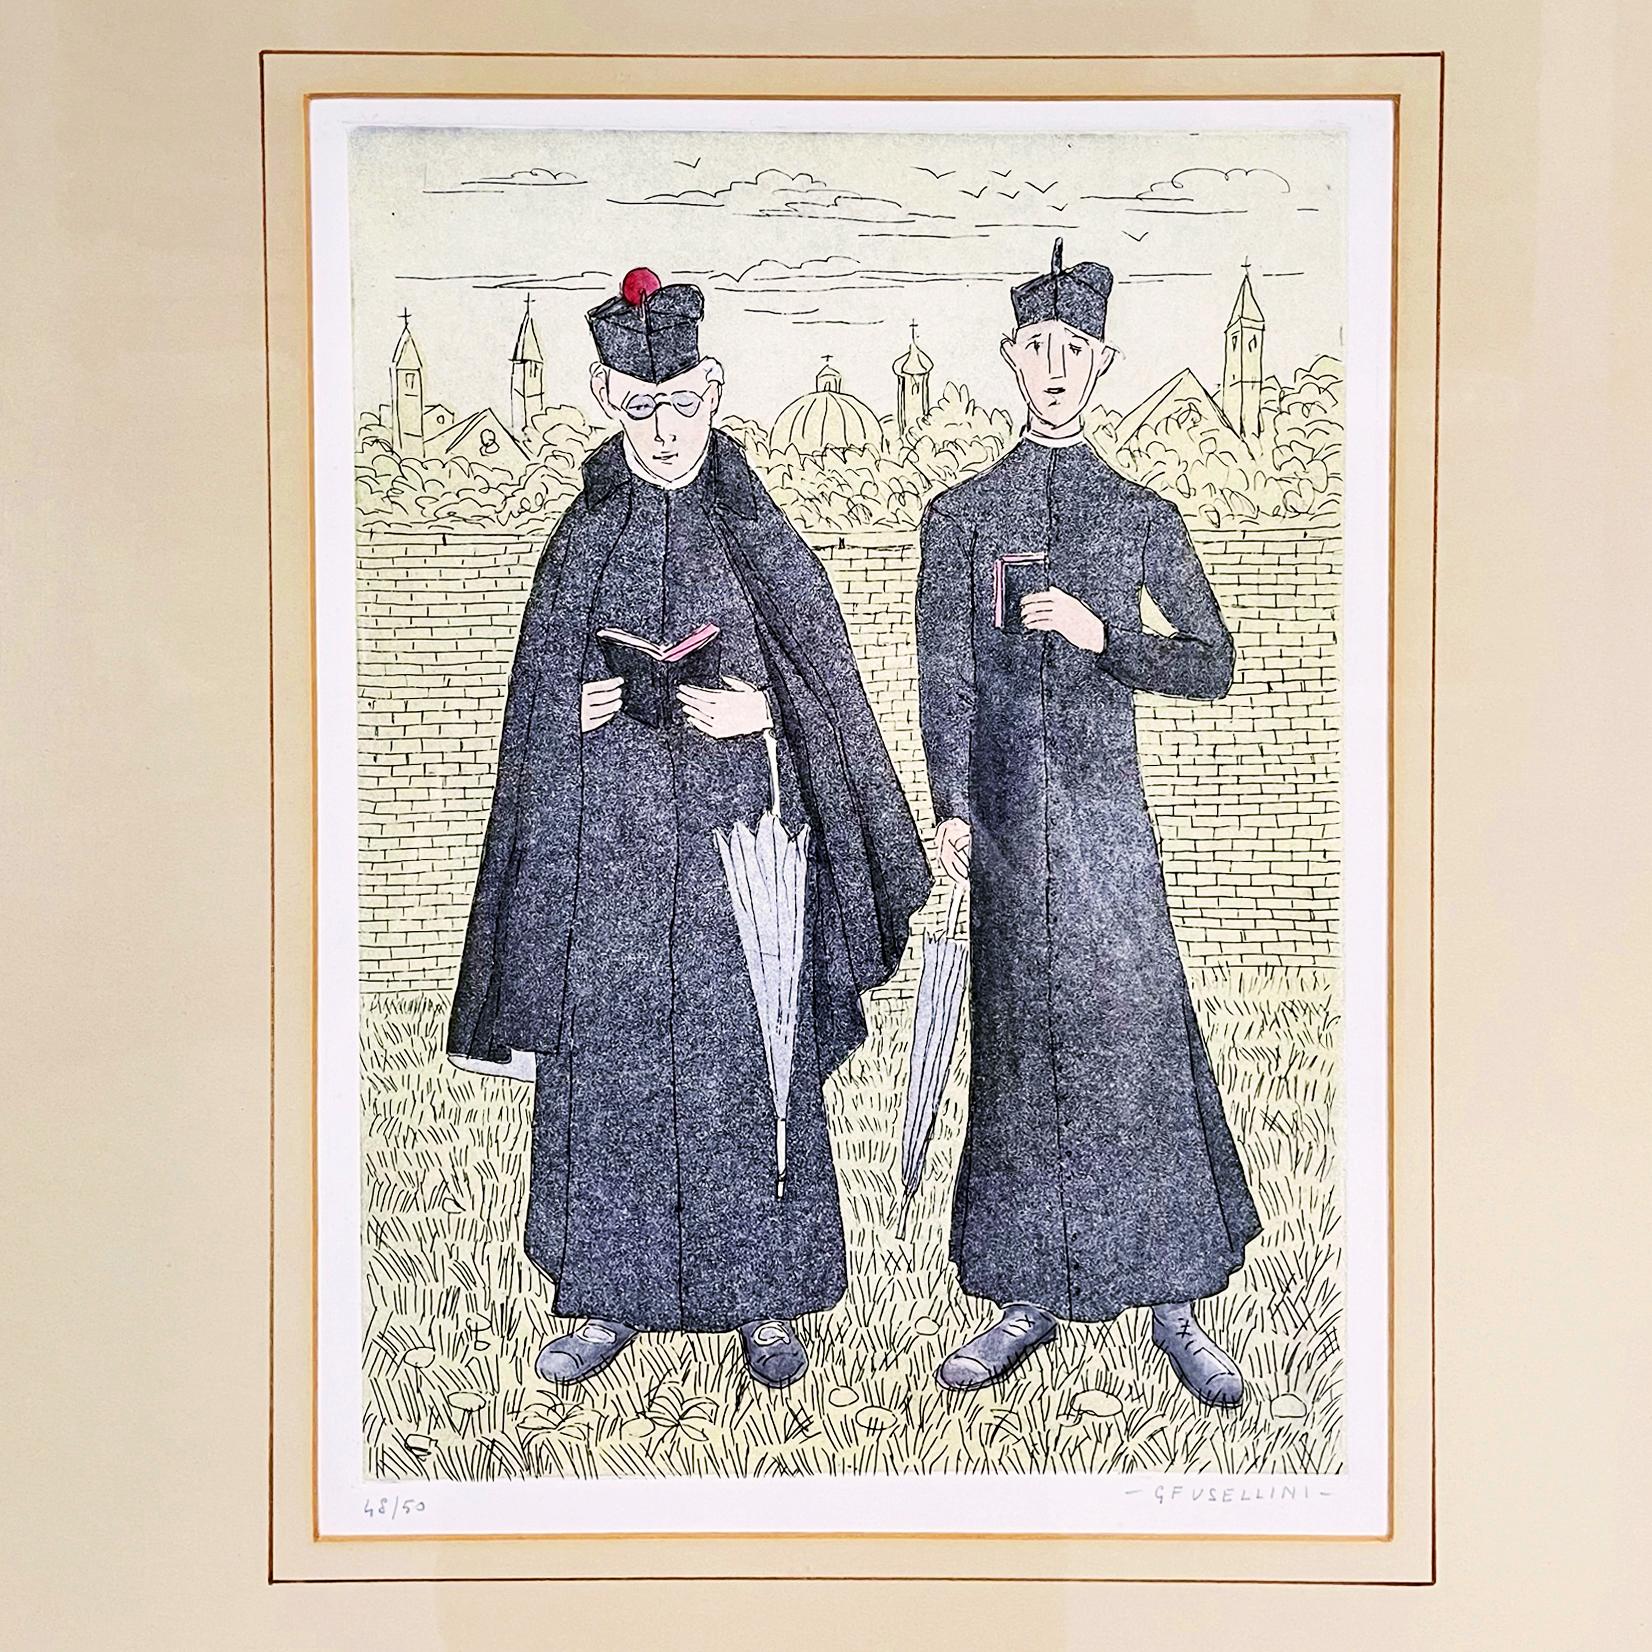 Italian modern Engraving print with color of two priests by Gianfilippo Usellini, 1900-1970s
Fantastic Colored print made with the technique of engraving on paper, representing two priests with the Bible in their hand in the garden and in the